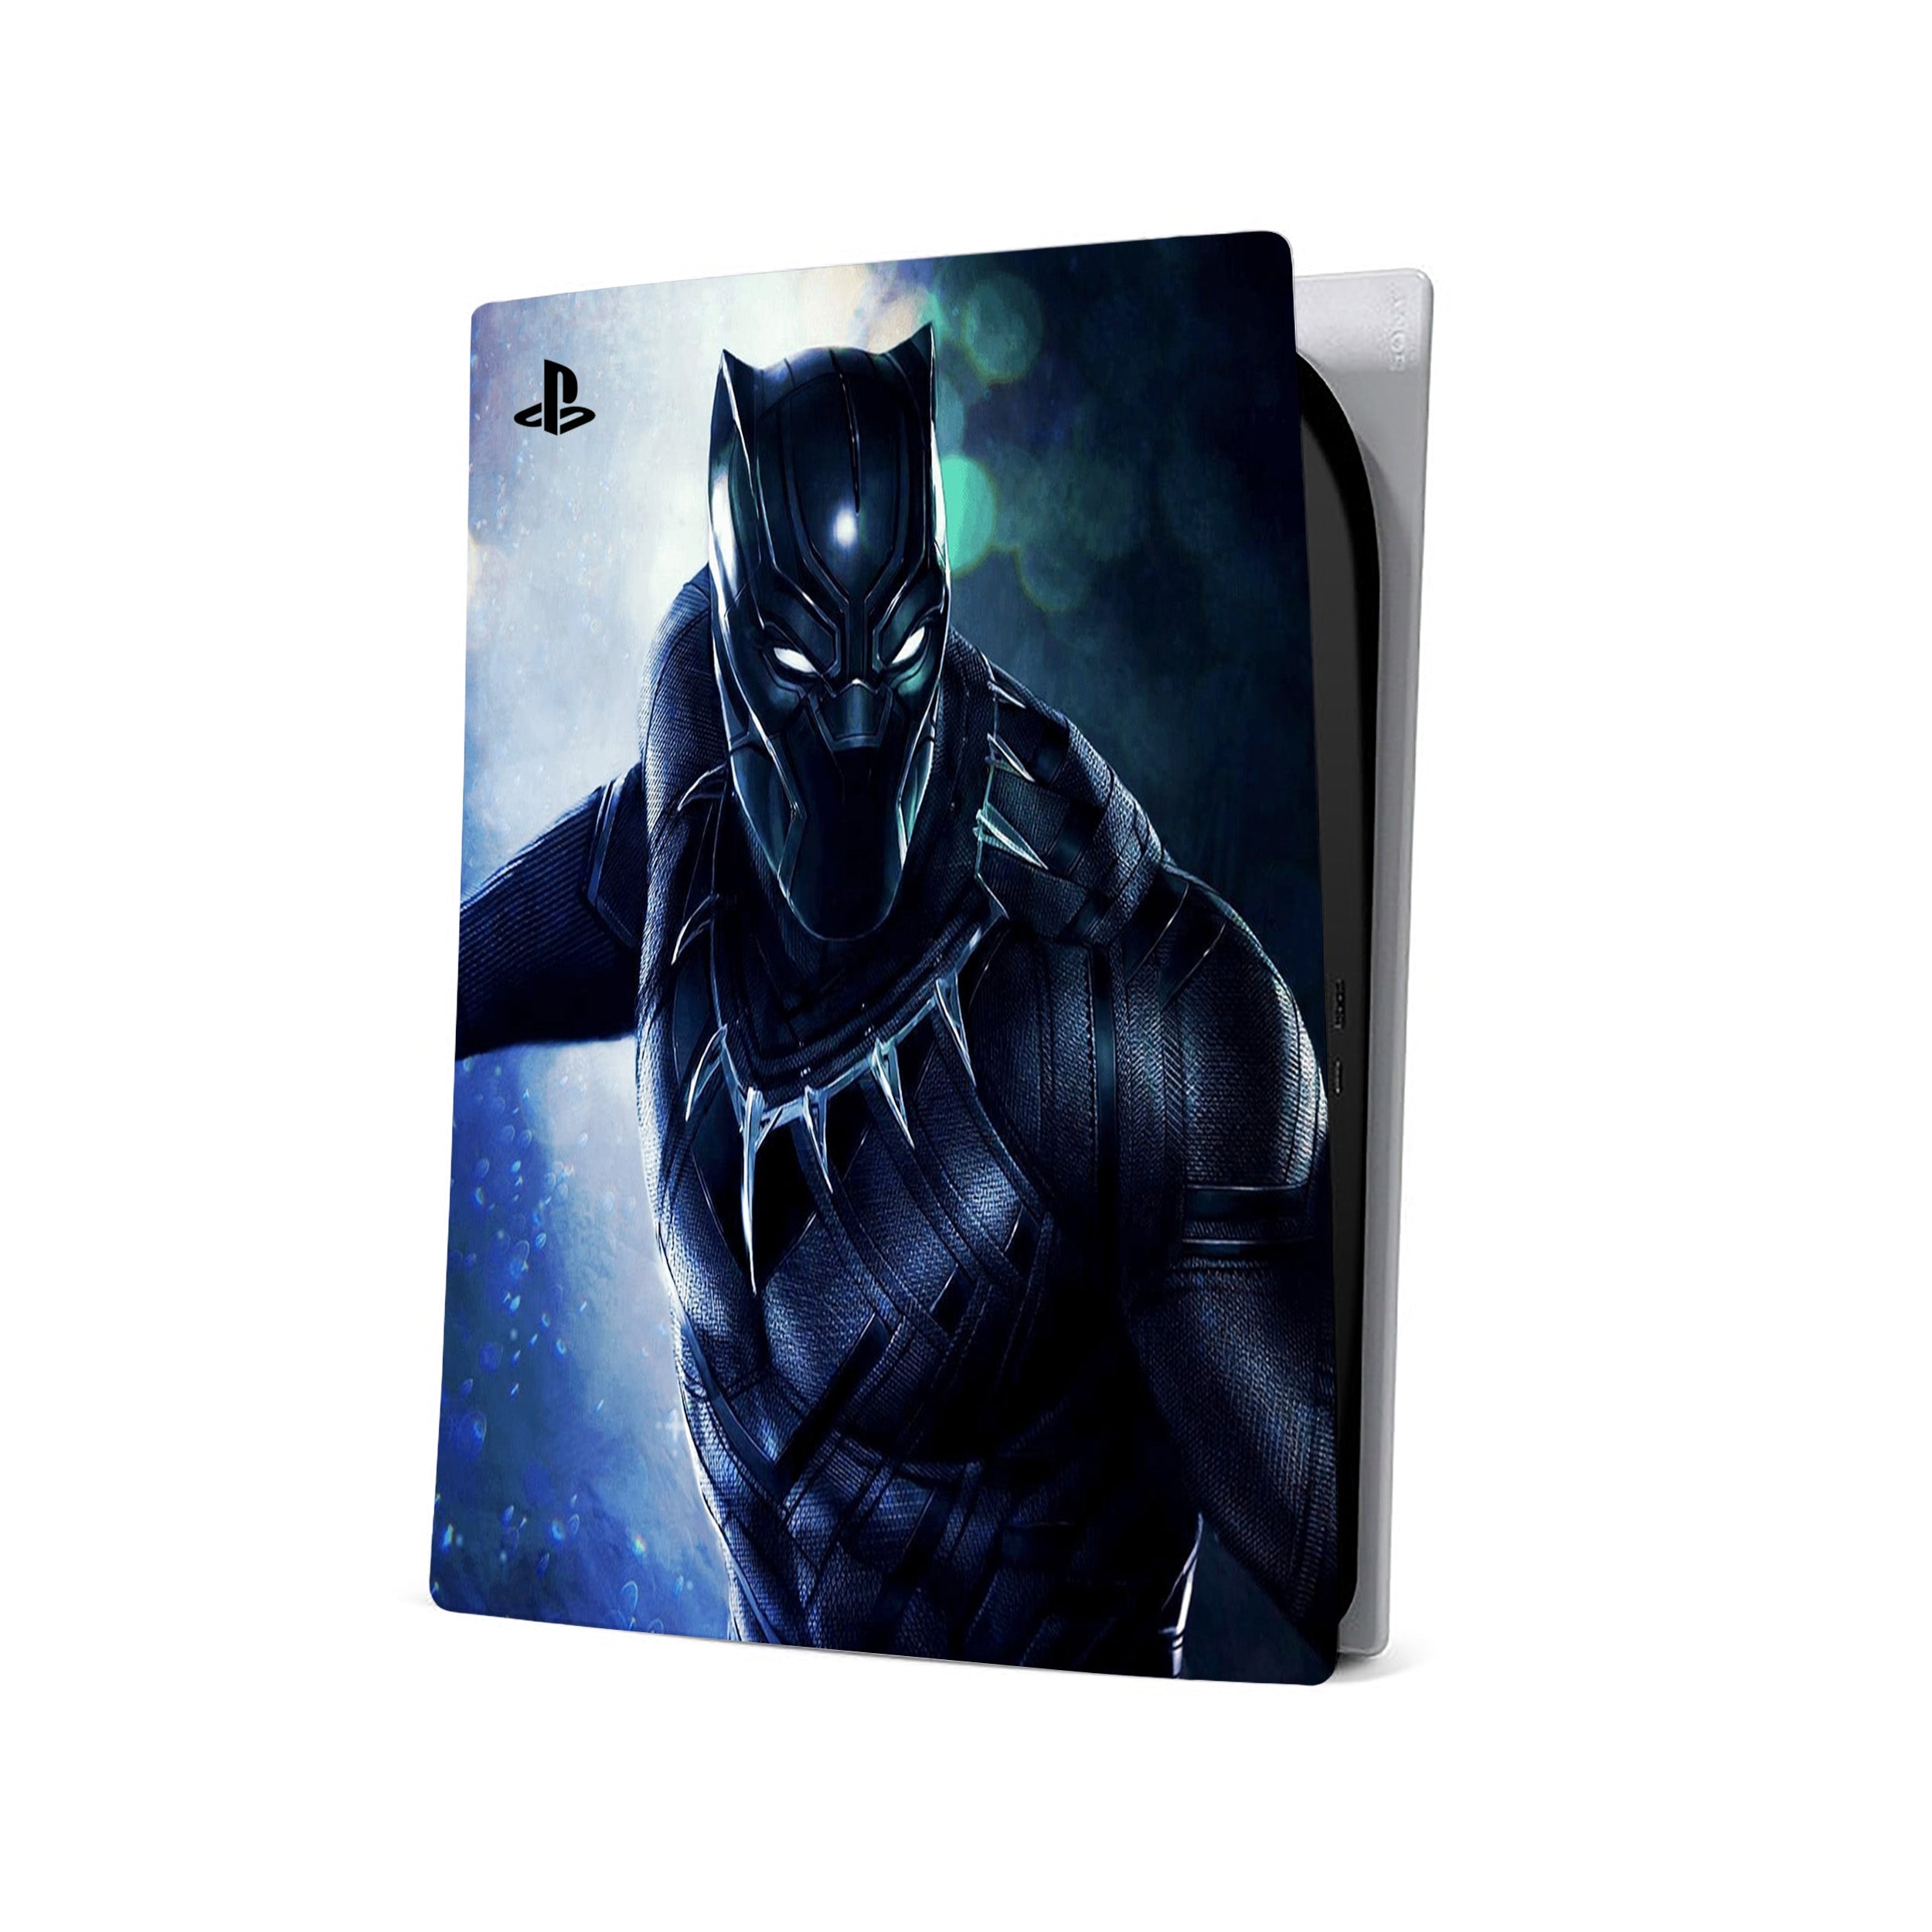 A video game skin featuring a Marvel Black Panther design for the PS5.